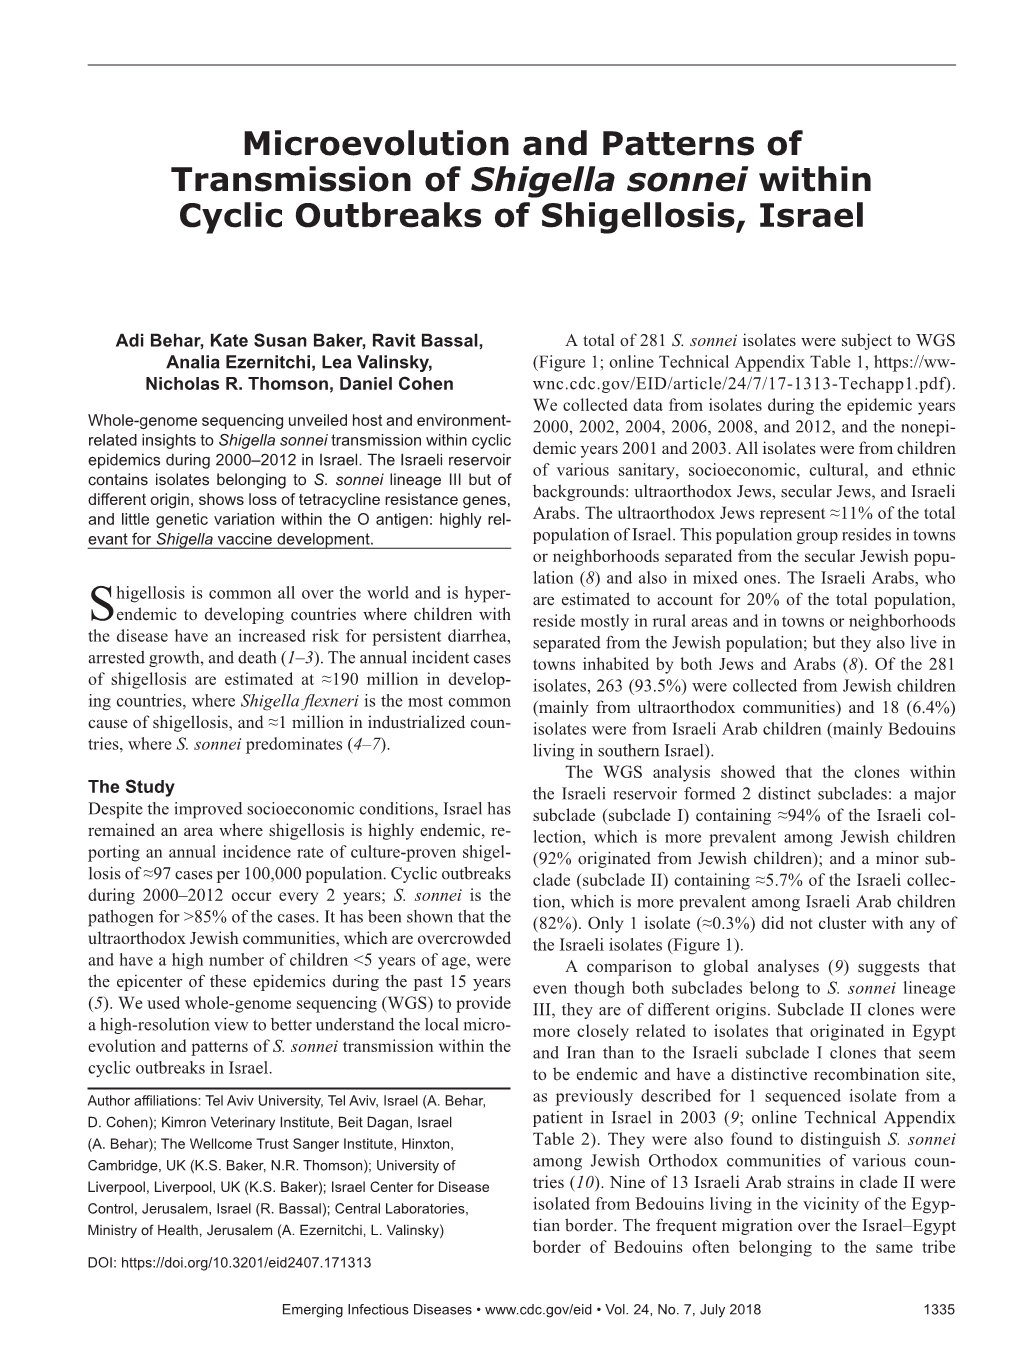 Microevolution and Patterns of Transmission of Shigella Sonnei Within Cyclic Outbreaks of Shigellosis, Israel